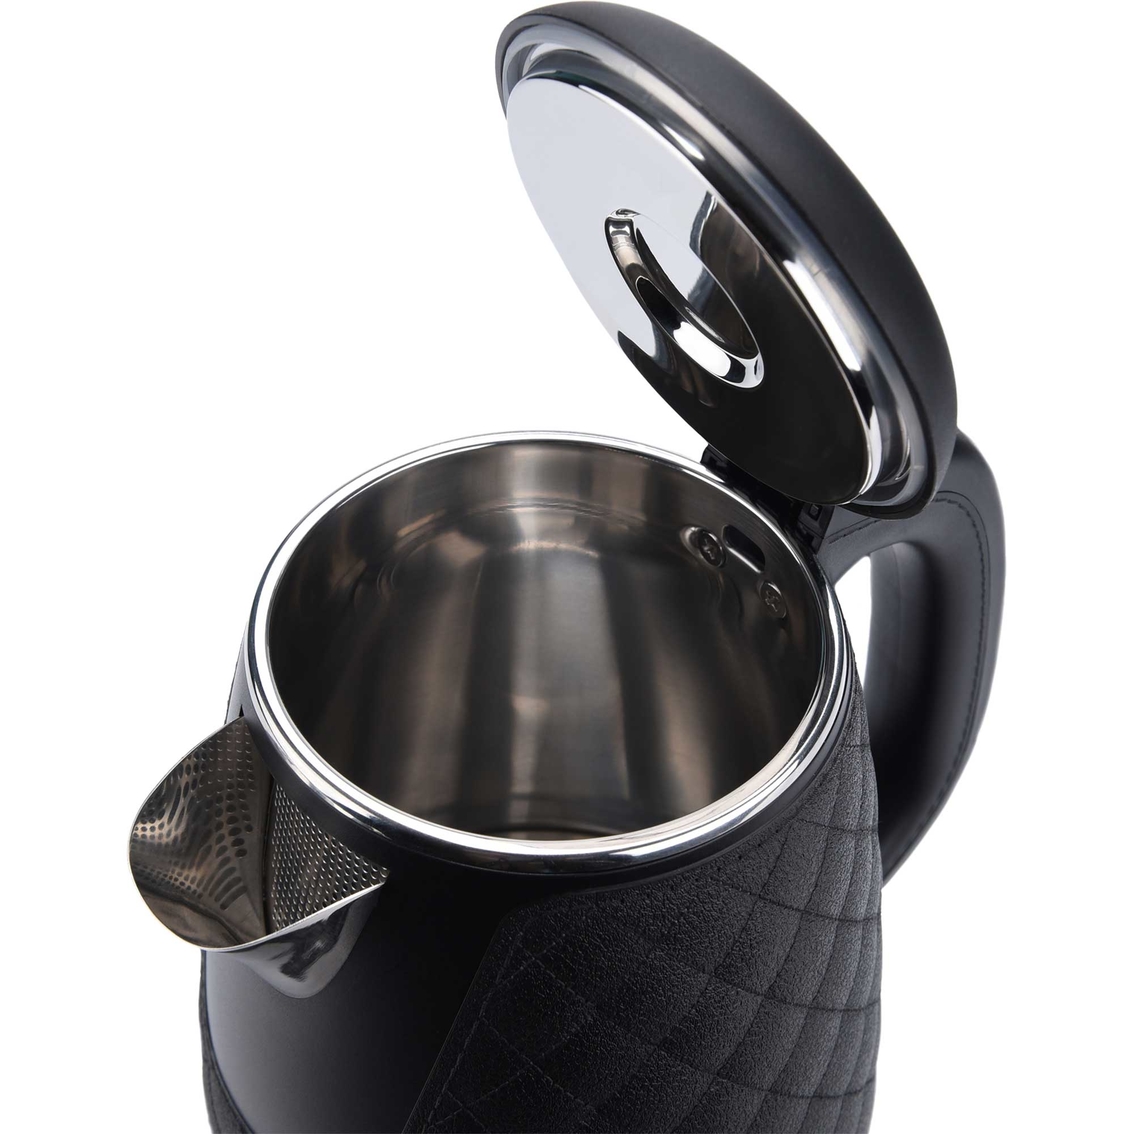 Aroma 7 Cup Stainless Steel Electric Kettle, Coffee, Tea & Espresso, Furniture & Appliances